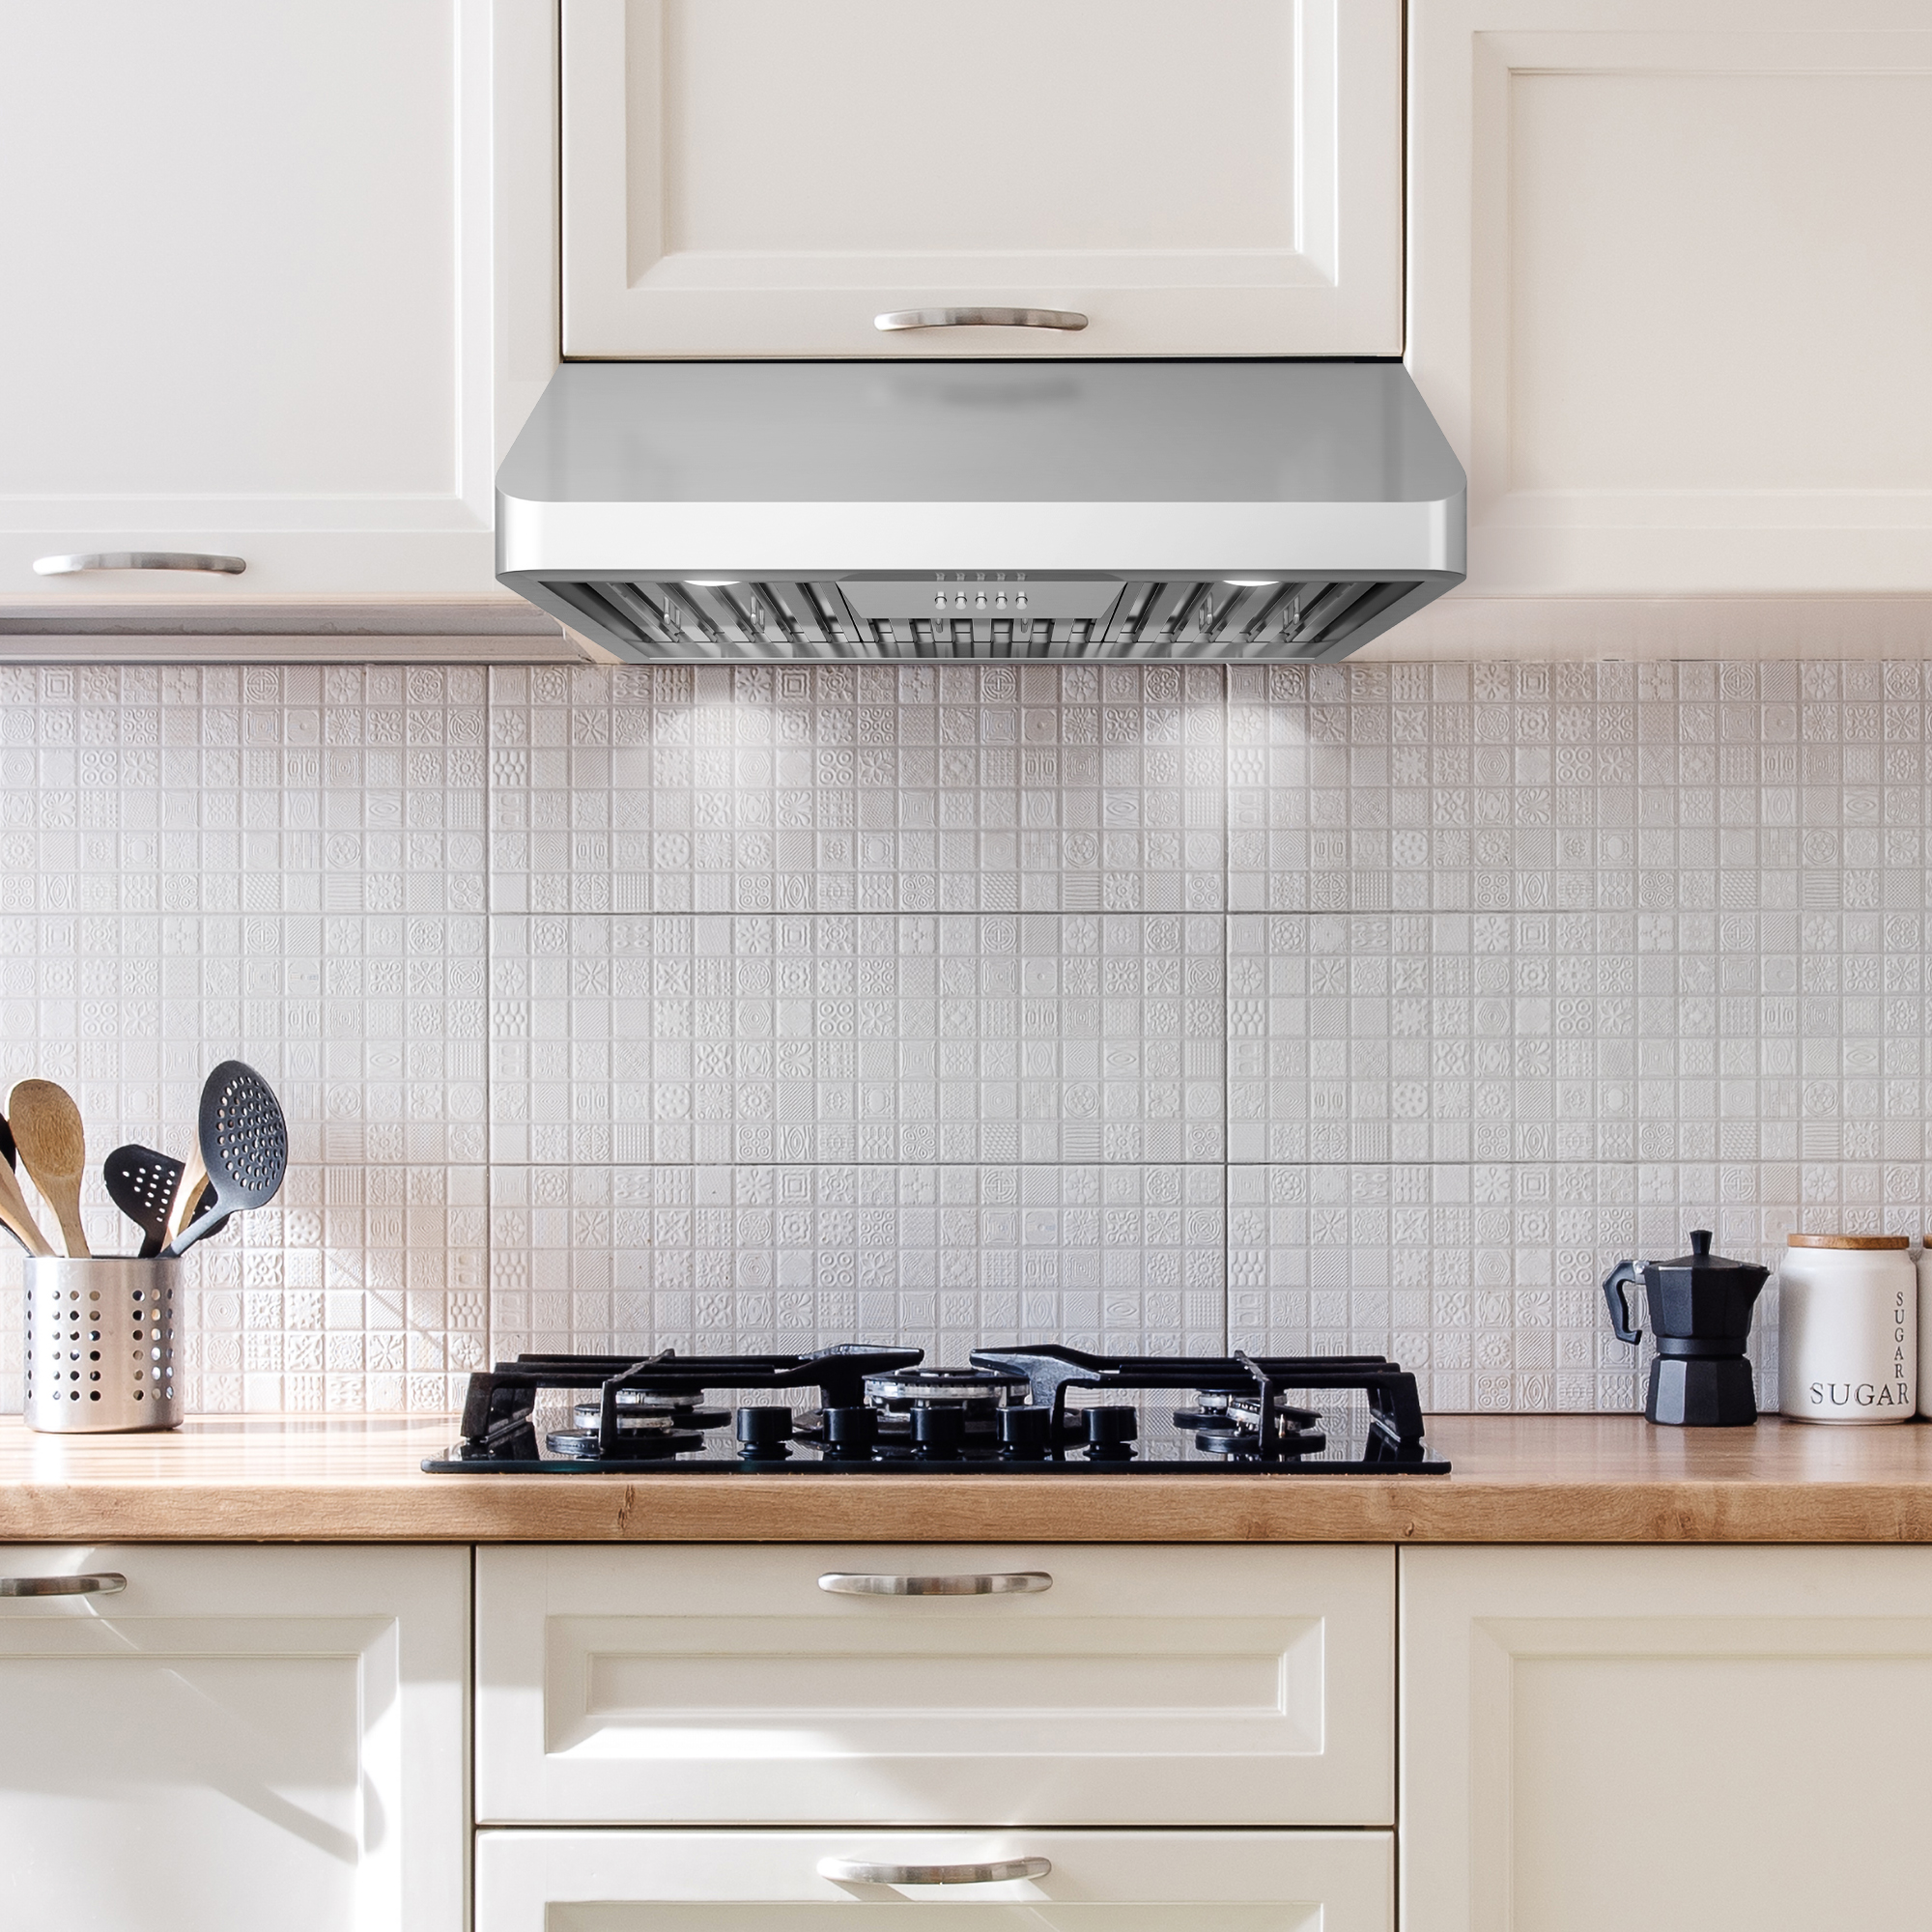 Cosmo 30 in. Ducted Range Hood in Stainless Steel with Touch Controls, LED Lighting and Permanent Filters, Silver